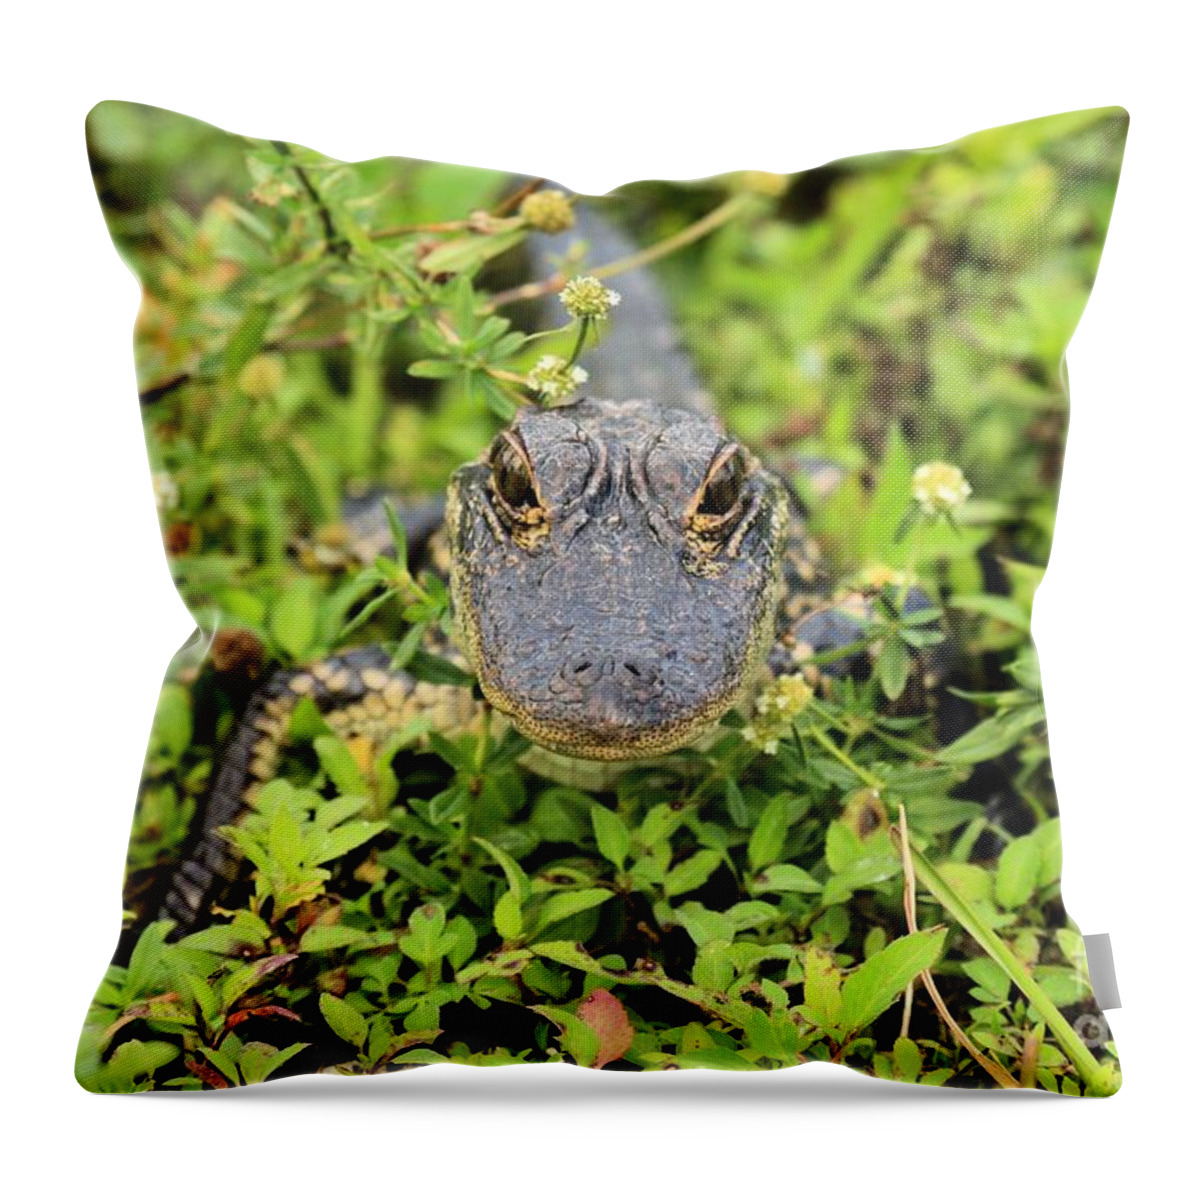 Alligator Throw Pillow featuring the photograph Baby Gator by Adam Jewell